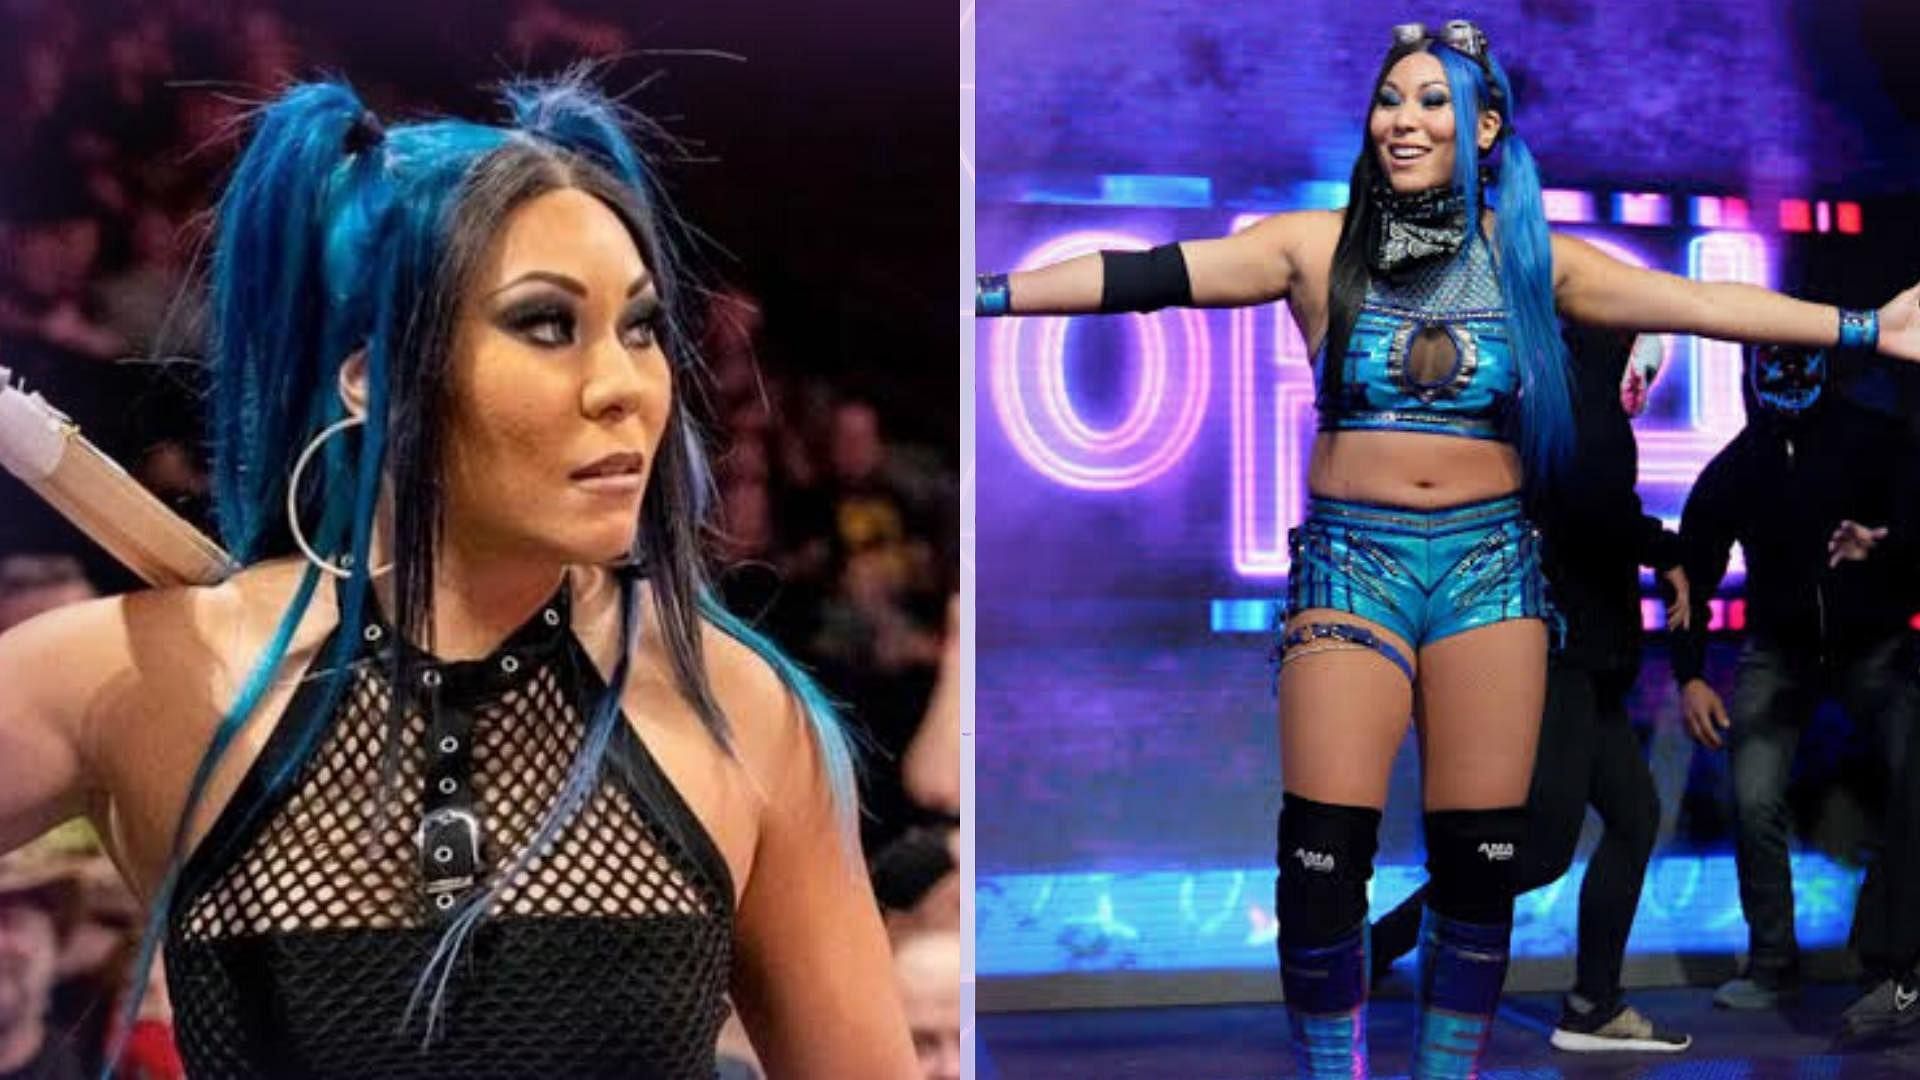 Mia Yim is currently featured as a member of the O.C.